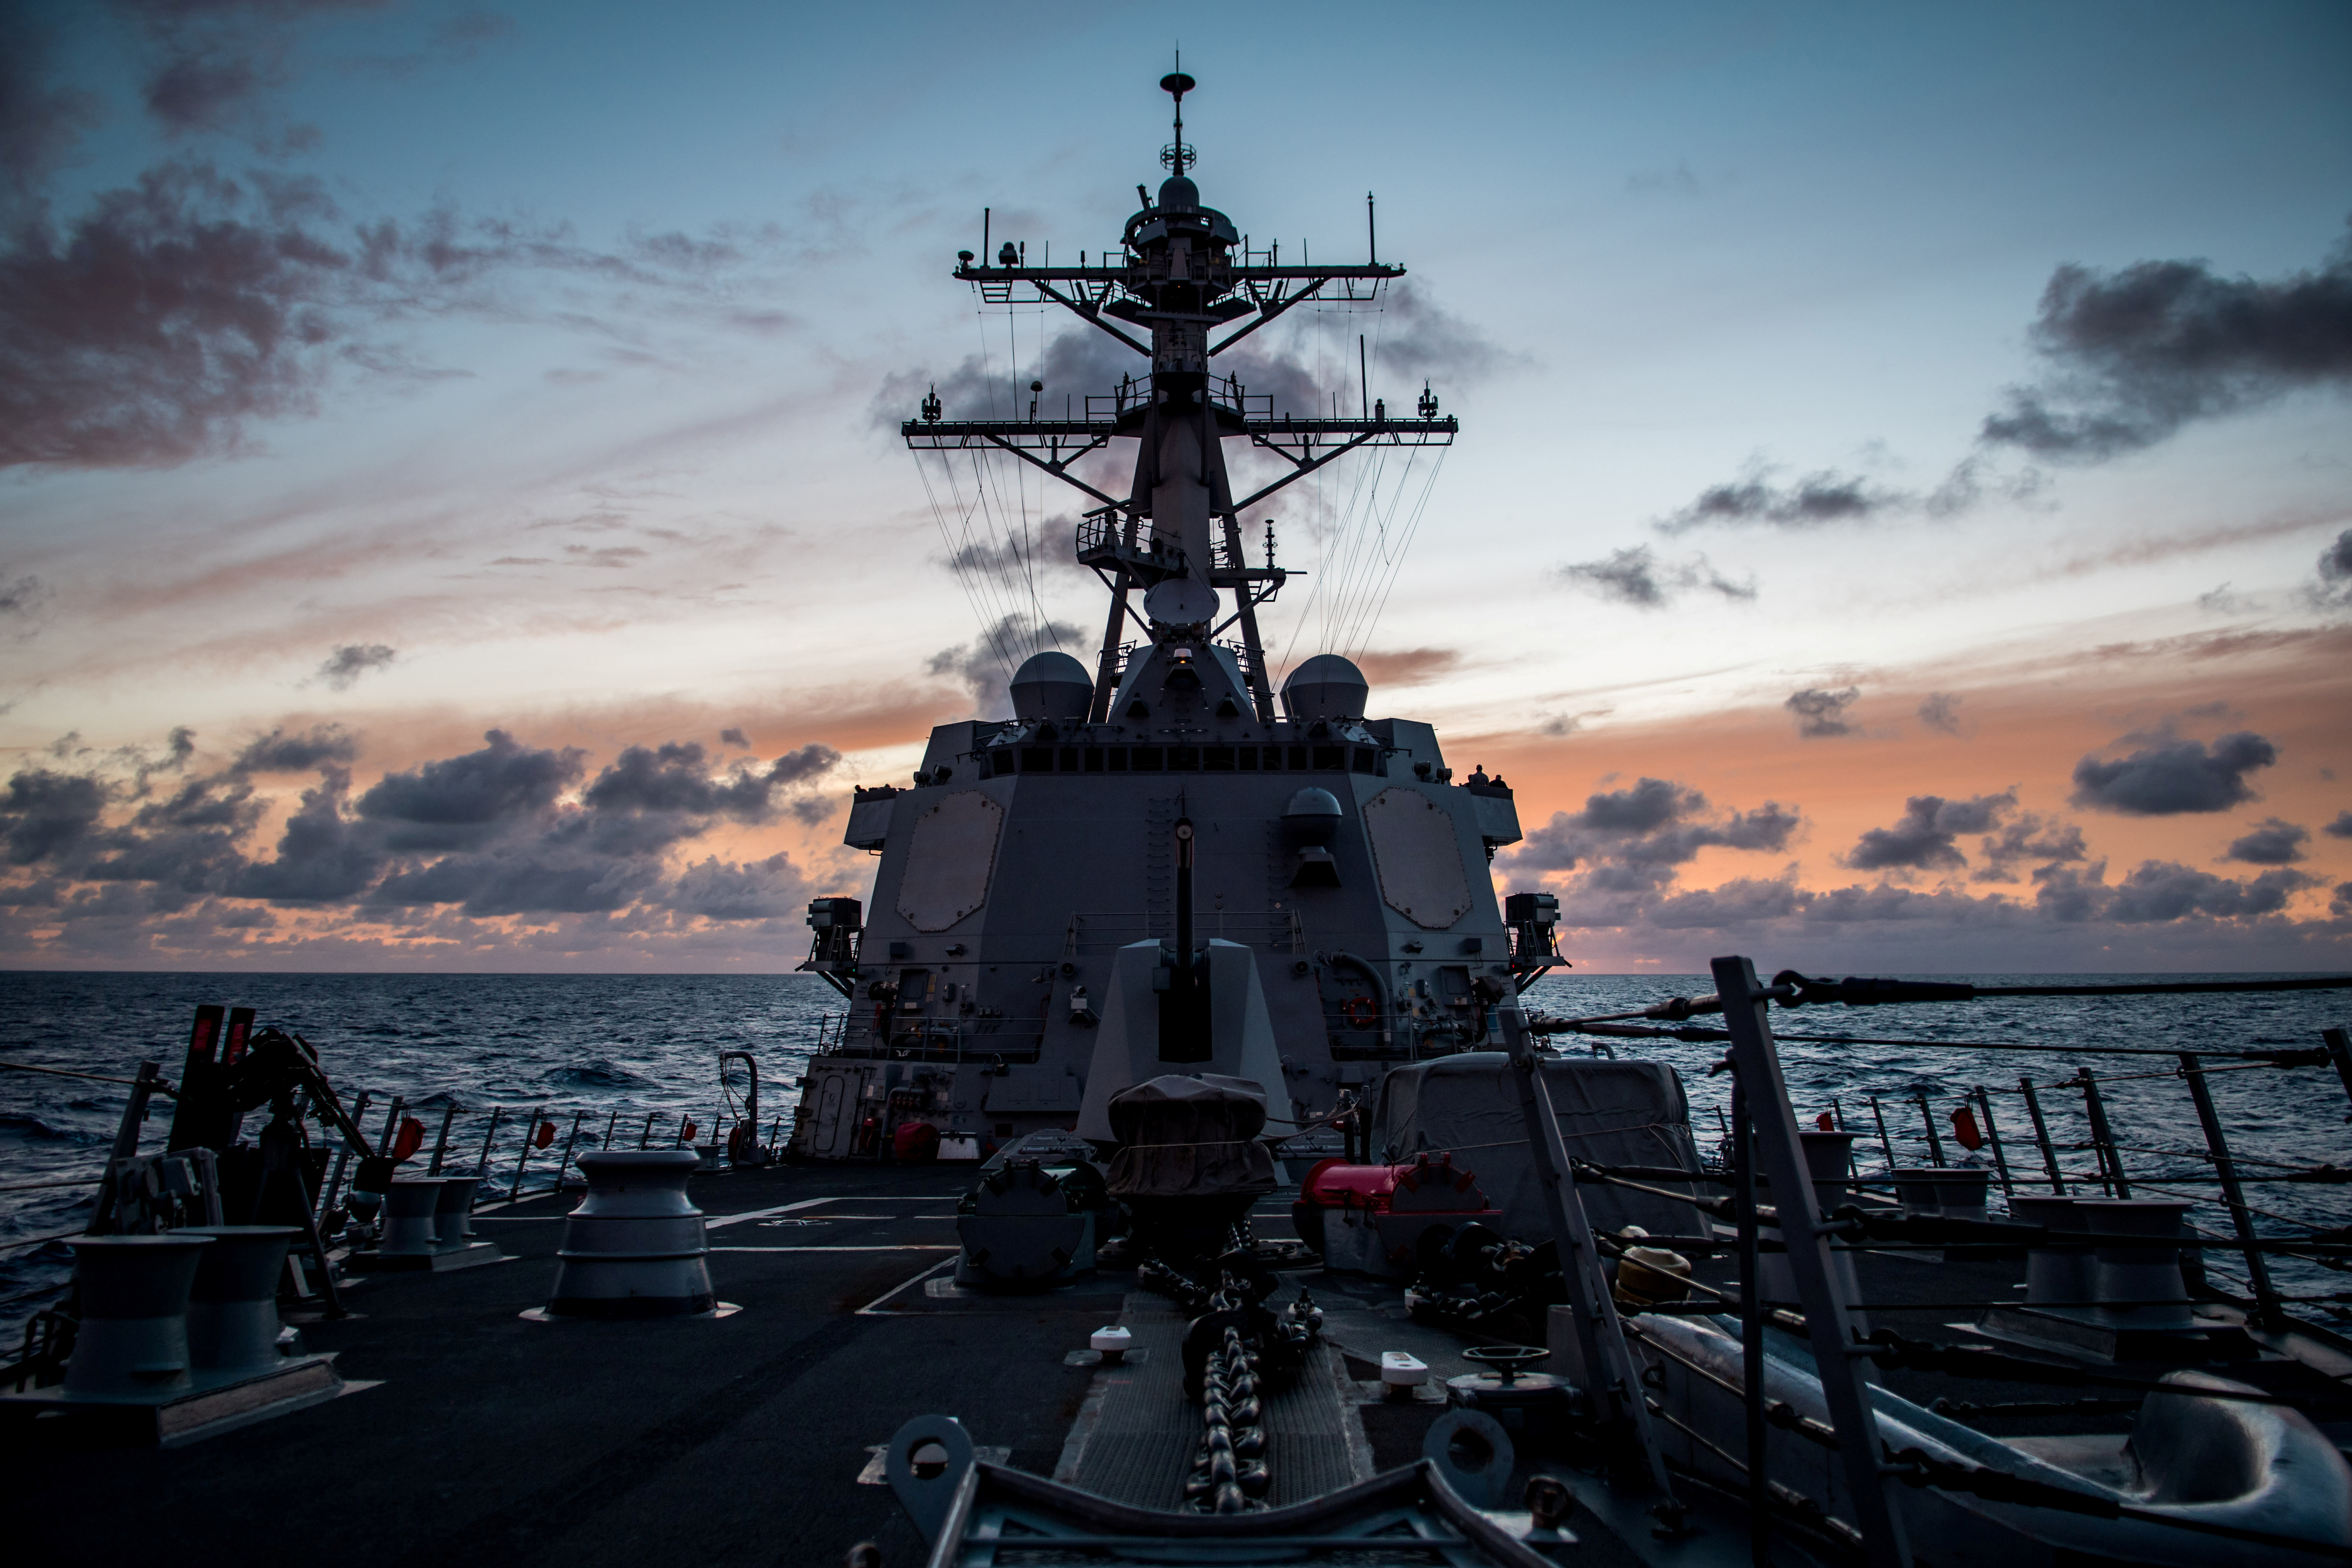 The guided-missile destroyer USS Dewey (DDG 105) transits the Pacific Ocean while participating in Rim of the Pacific Exercise (RIMPAC),  July 10, 2018.  Photo taken July 10, 2018.  U.S. Navy photo by Mass Communication Specialist 2nd Class Devin M. Langer/U.S. Navy/Handout via REUTERS  